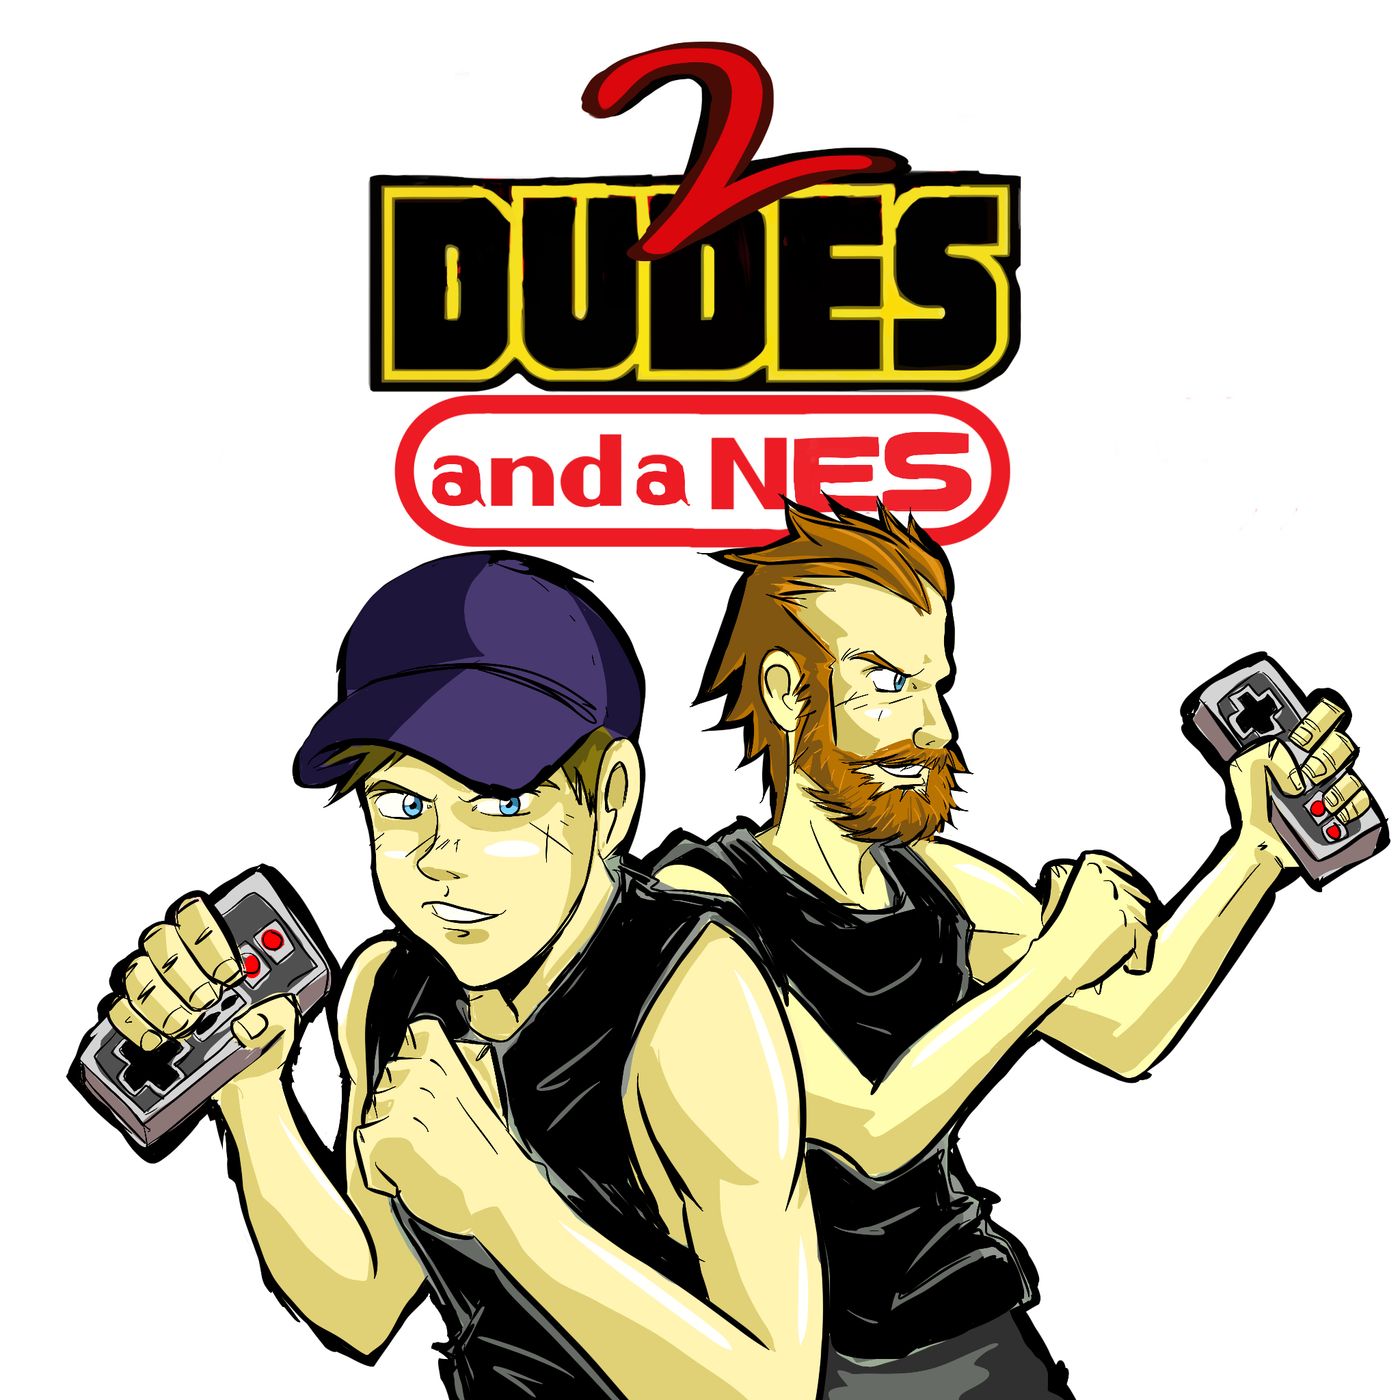 2 Dudes and a NES